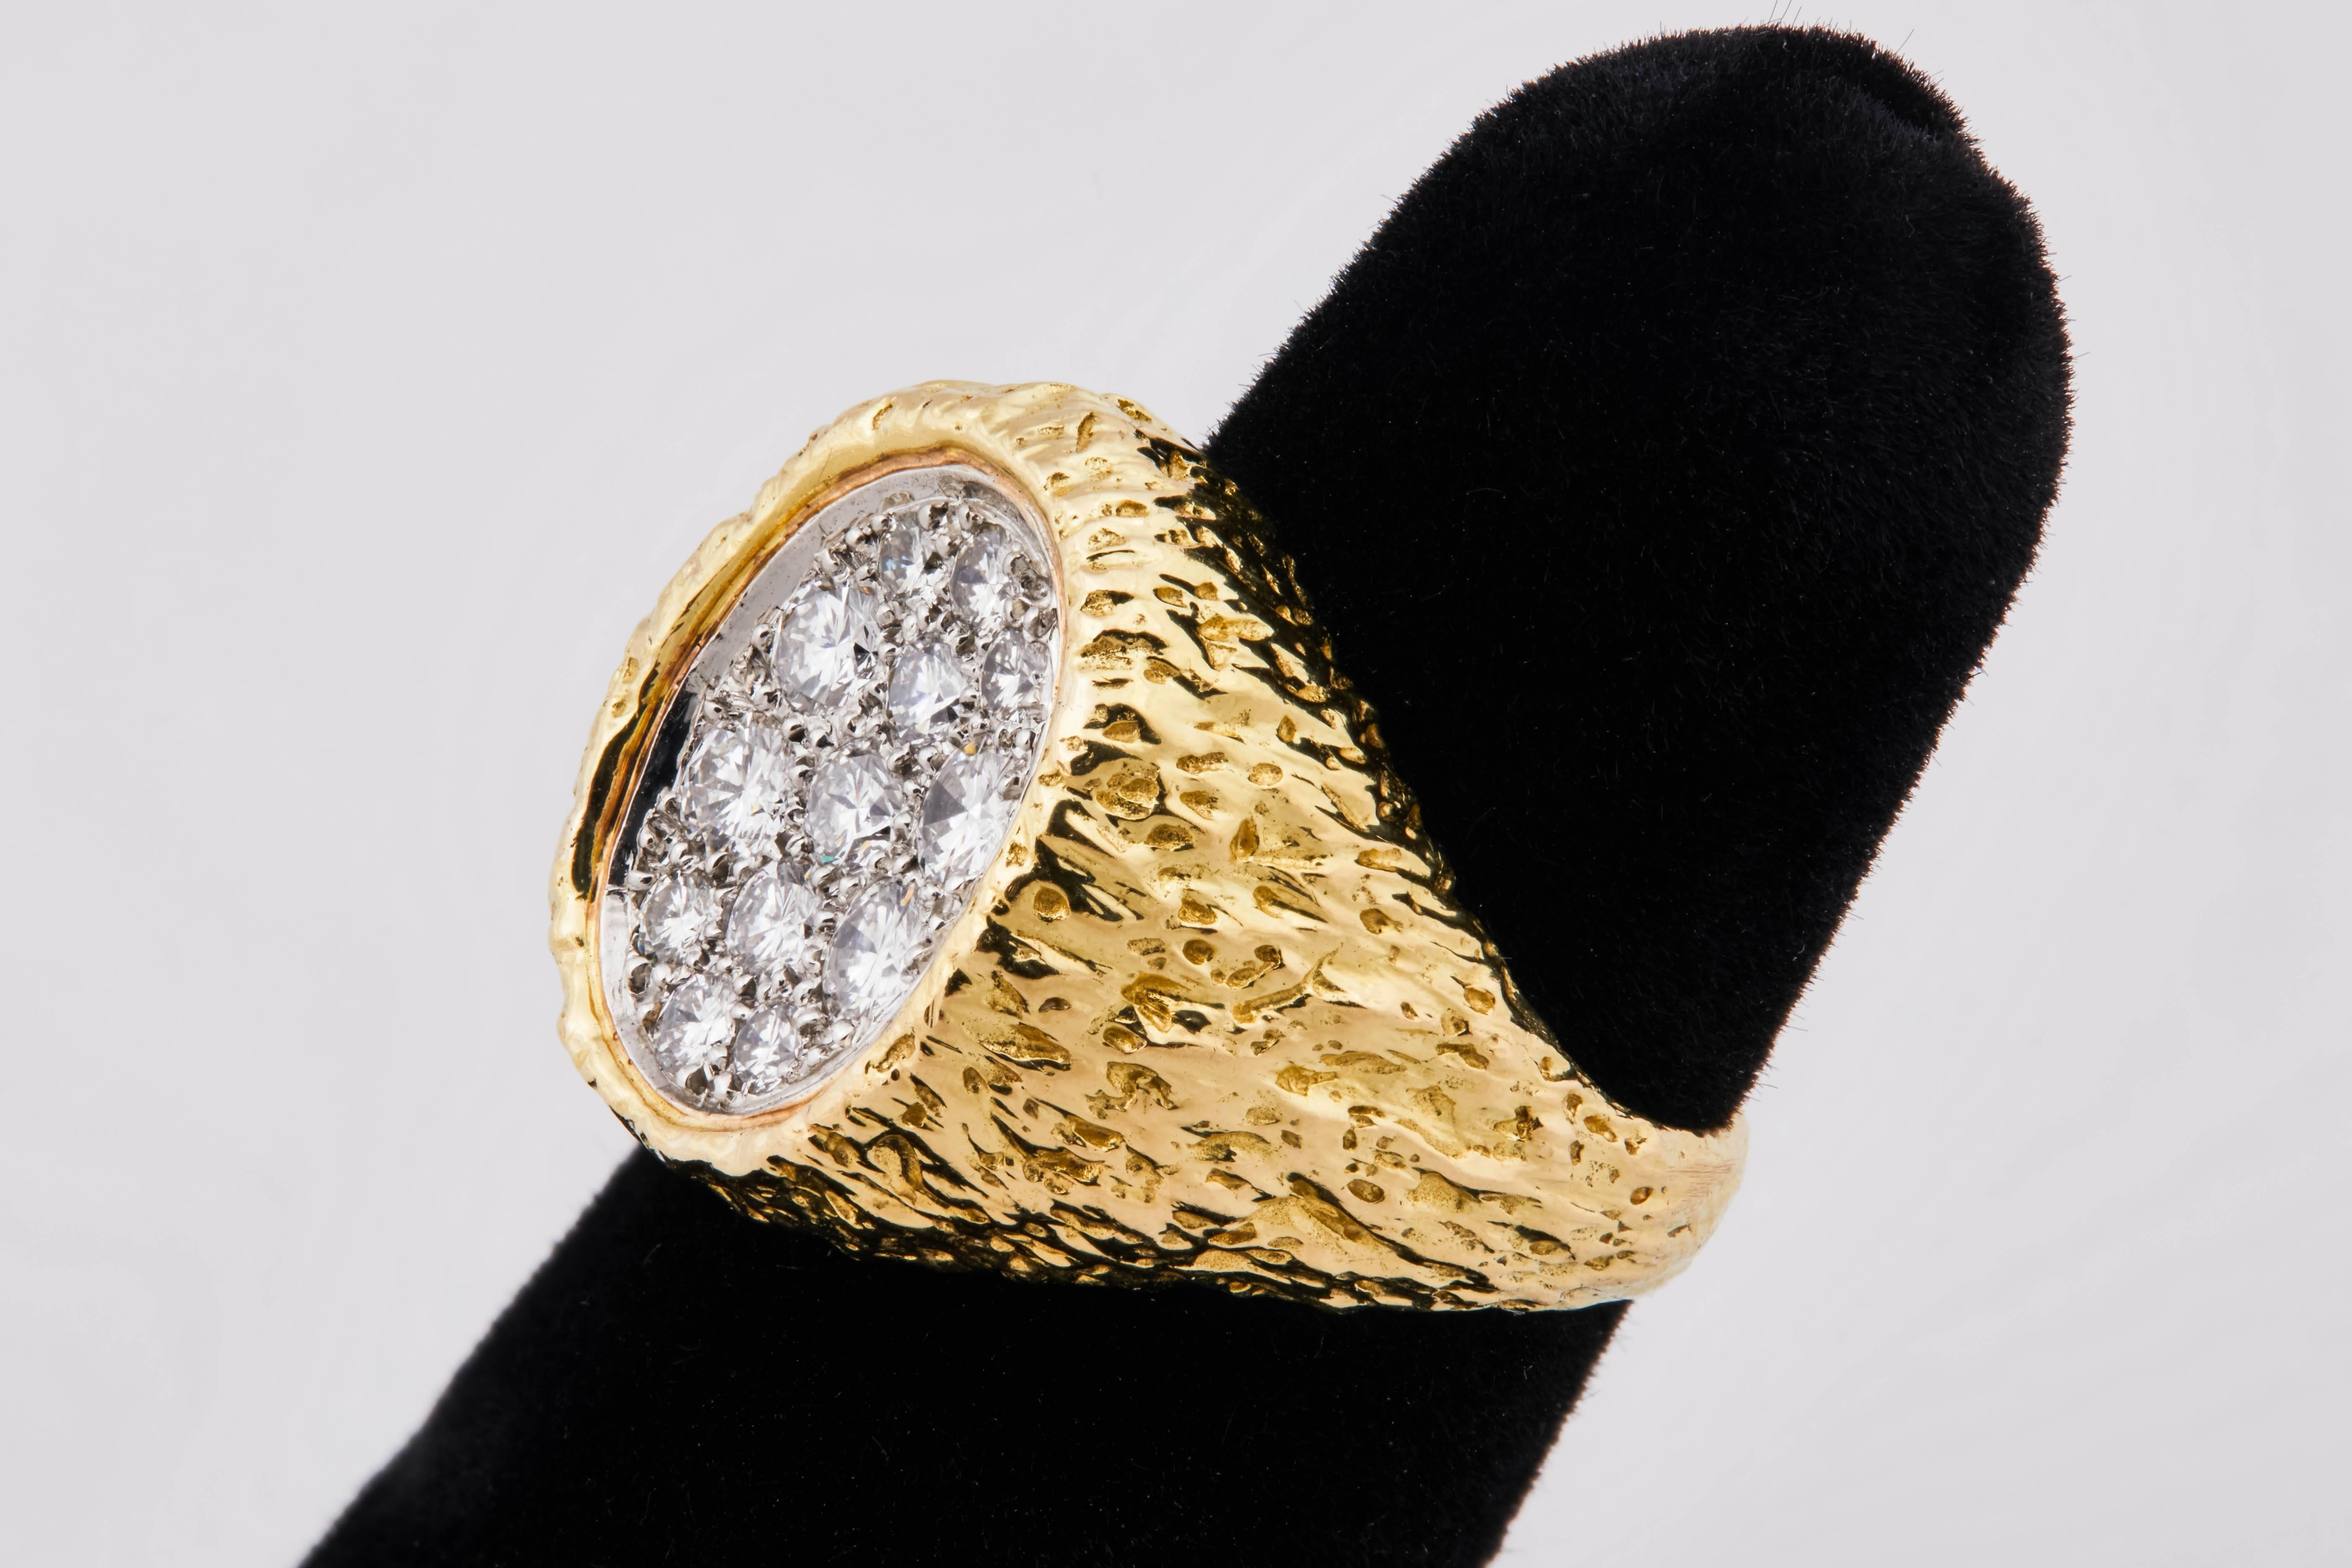 1970s Van Cleef & Arpels 18k Stamped Gold Cocktail Ring set with 12 round brilliant cut diamonds. Size 5. 